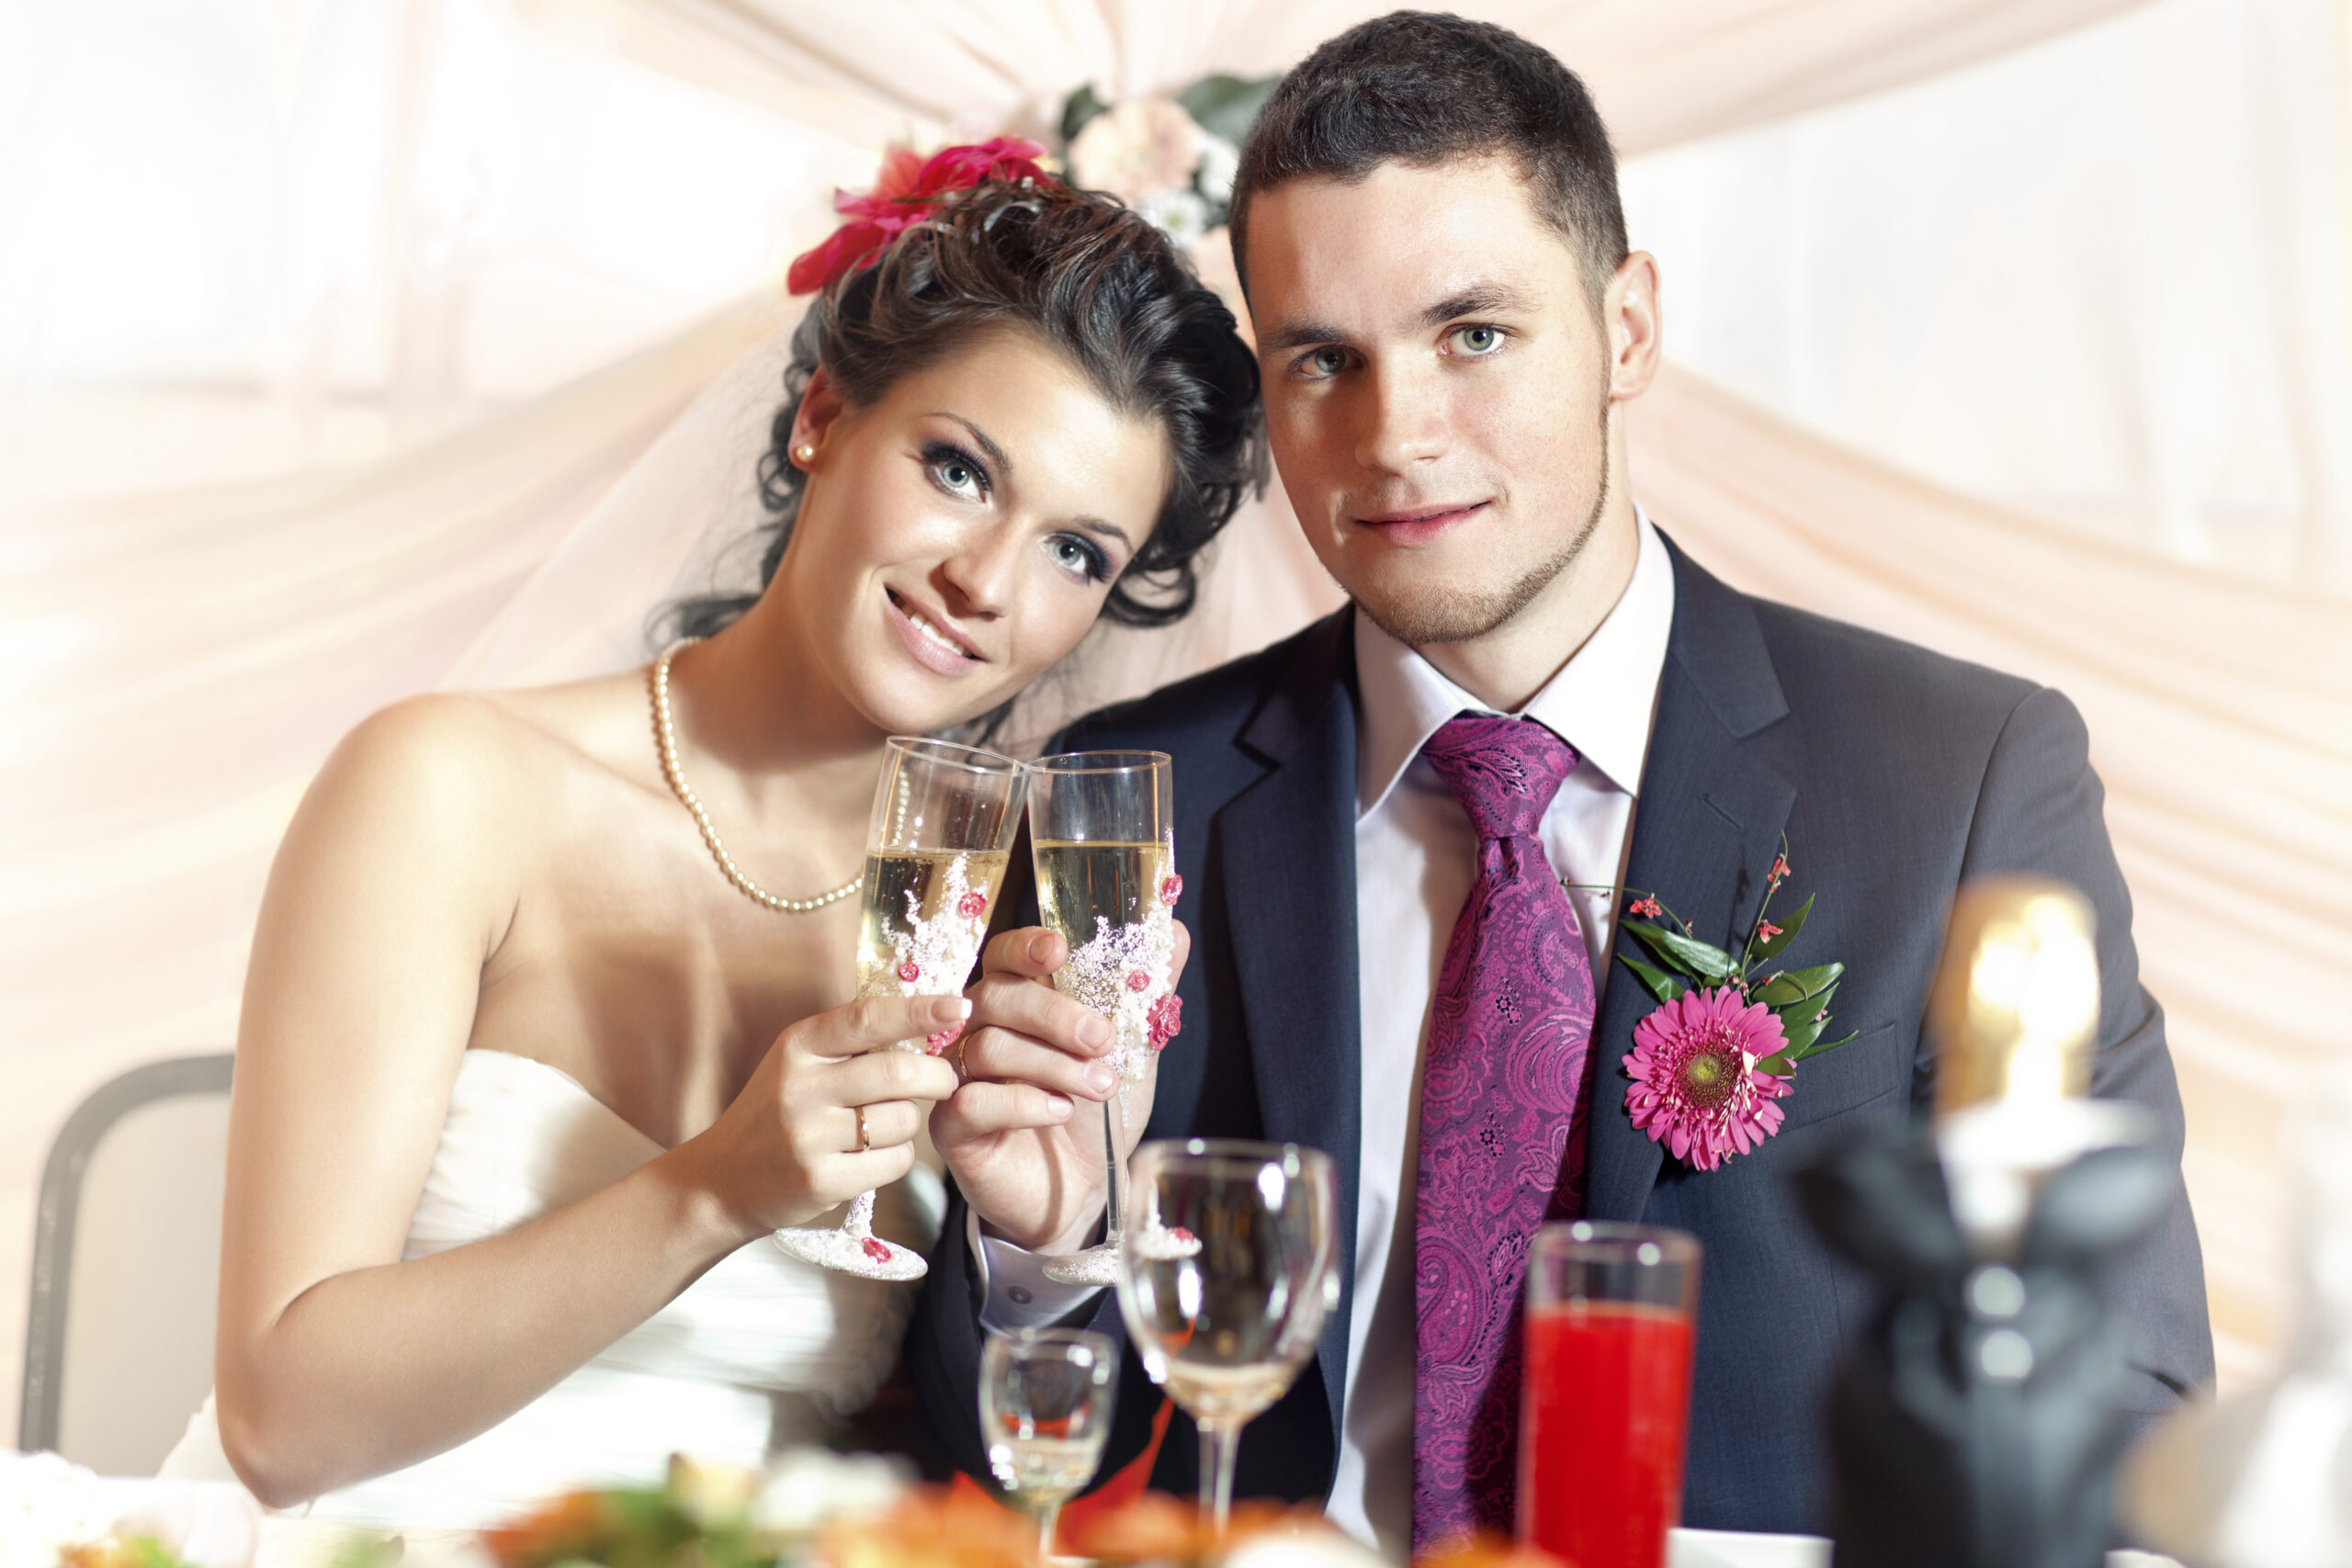 Bride and groom toasting at reception table